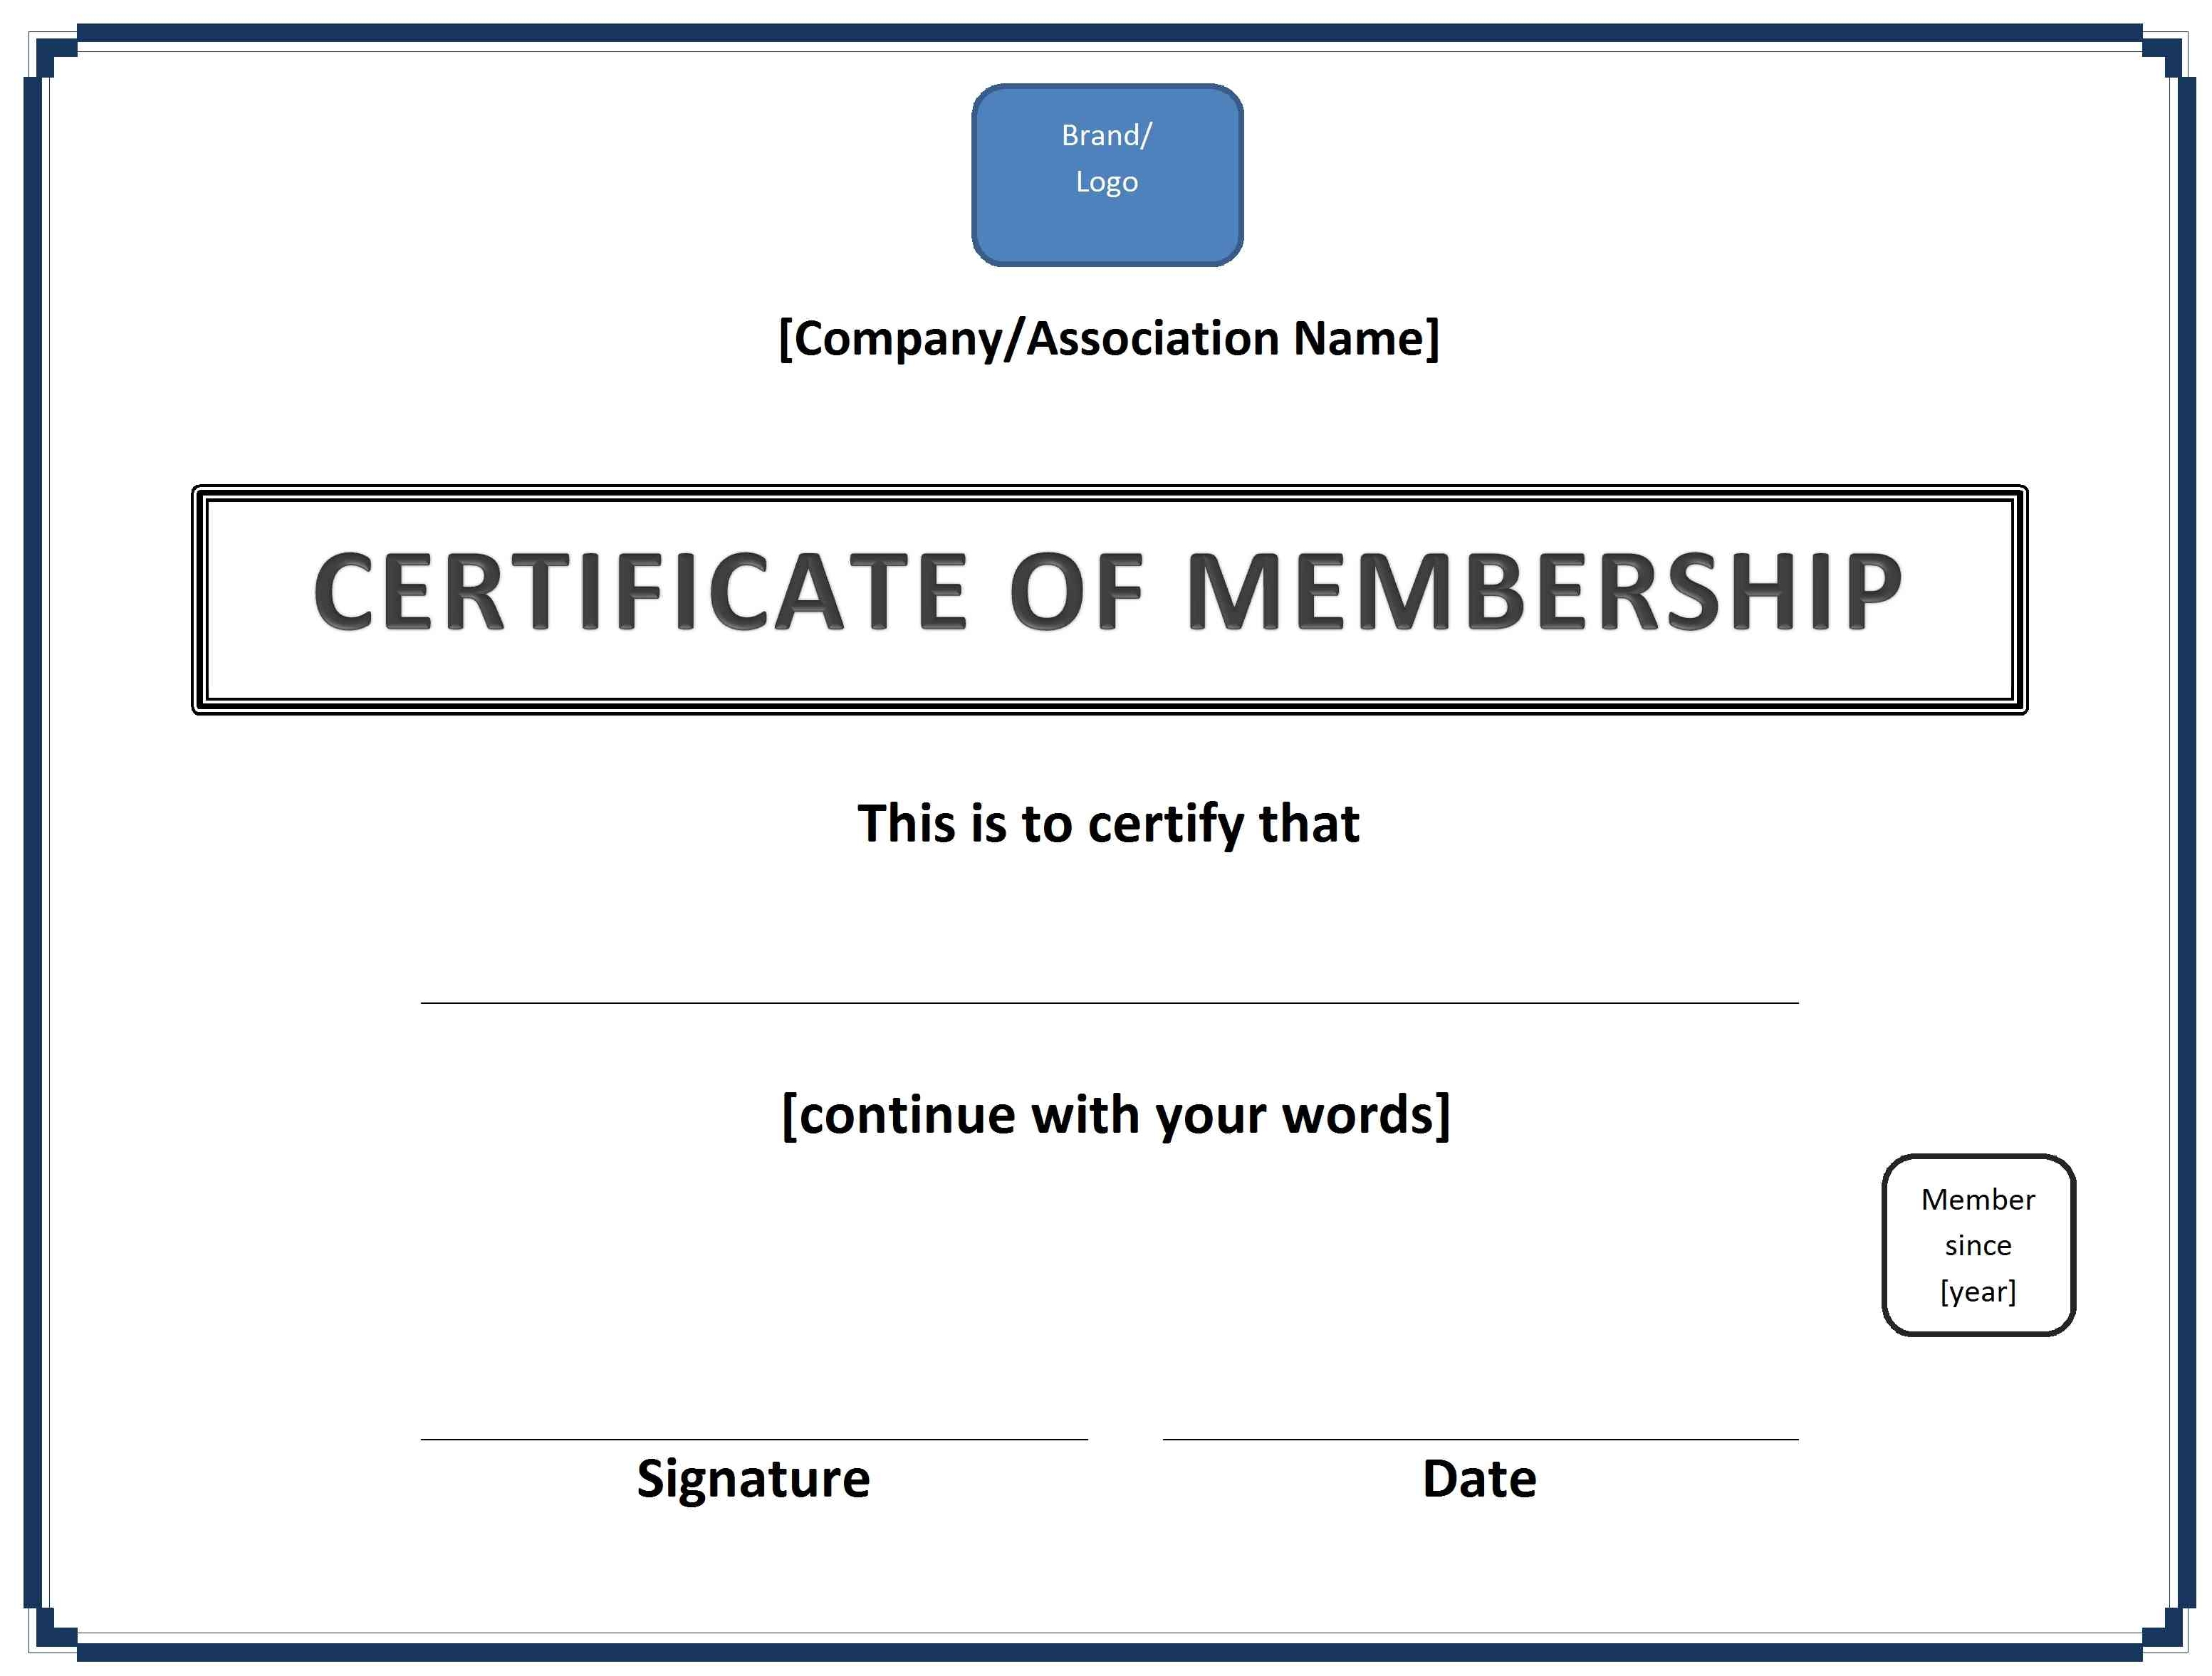 Membership Certificate Template Word from officetemplates.net